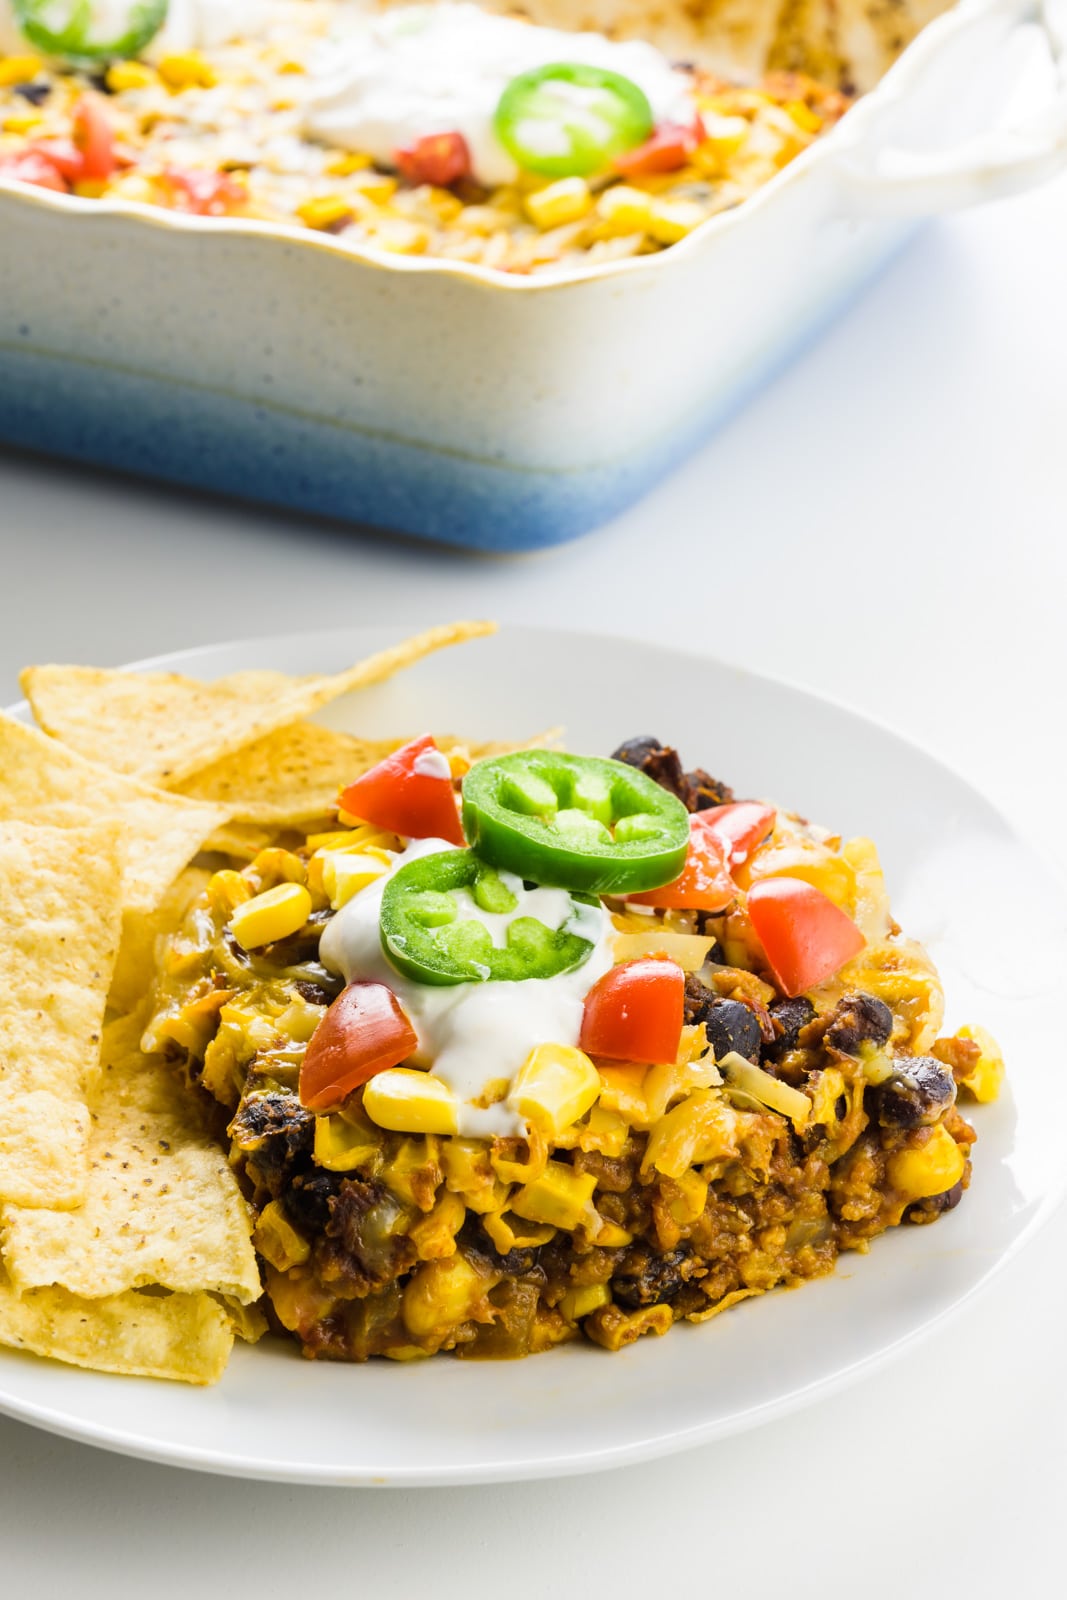 A slice of vegan taco casserole sits on a plate with tortilla chips. The rest of the casserole is behind it.